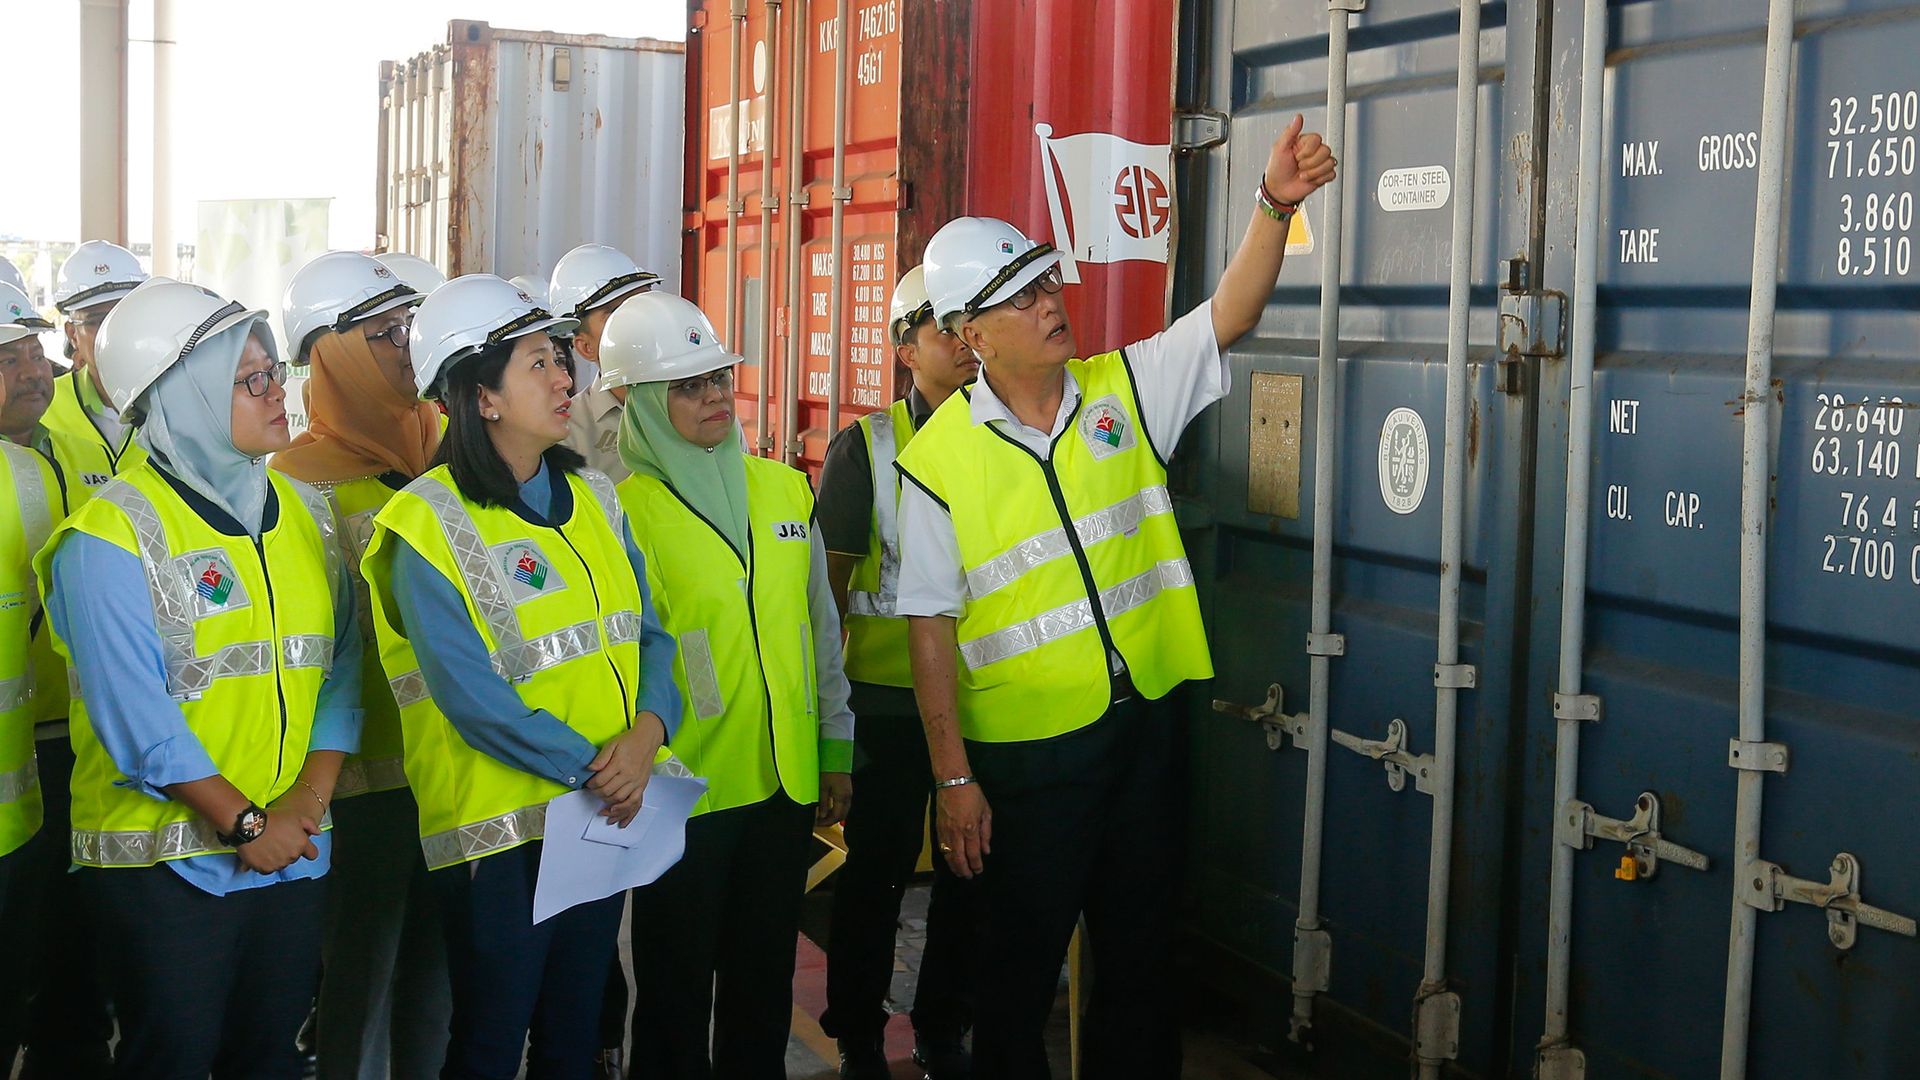 Malaysian Environment Minister Yeo Bee Yin (front 2nd L) and officials inspect a container containing plastic waste shipment on January 20, 2020 before sending back